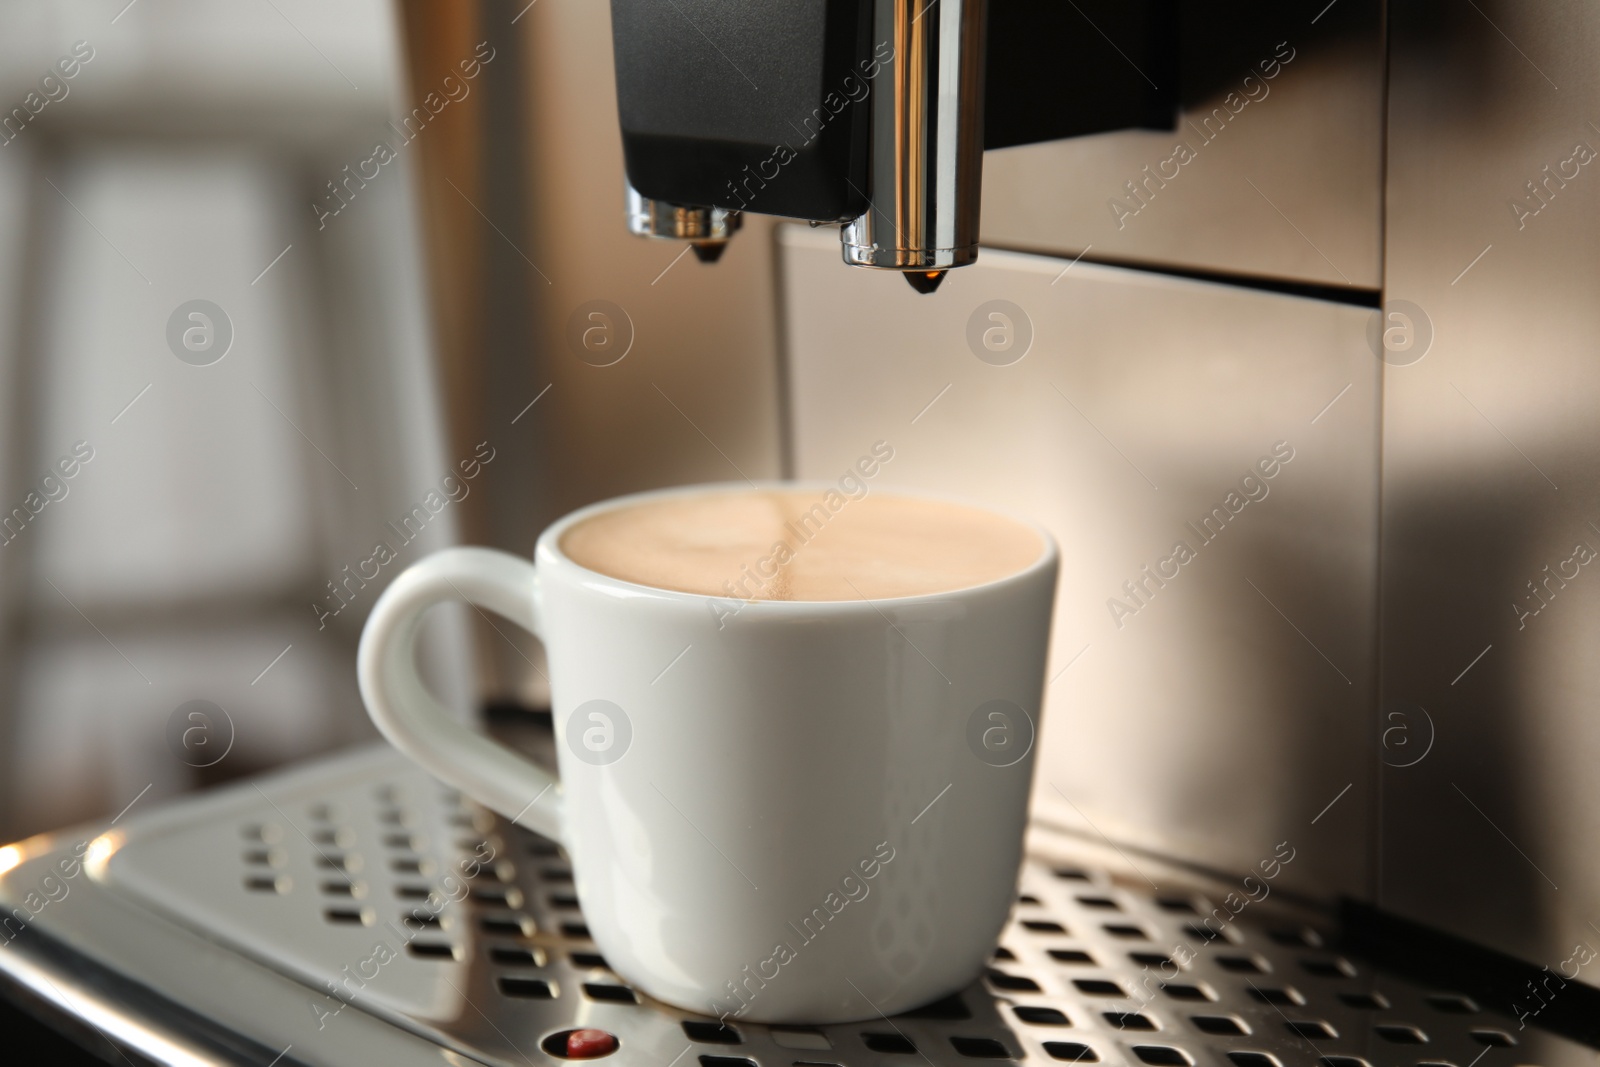 Photo of Espresso machine with cup of fresh coffee on drip tray against blurred background, closeup